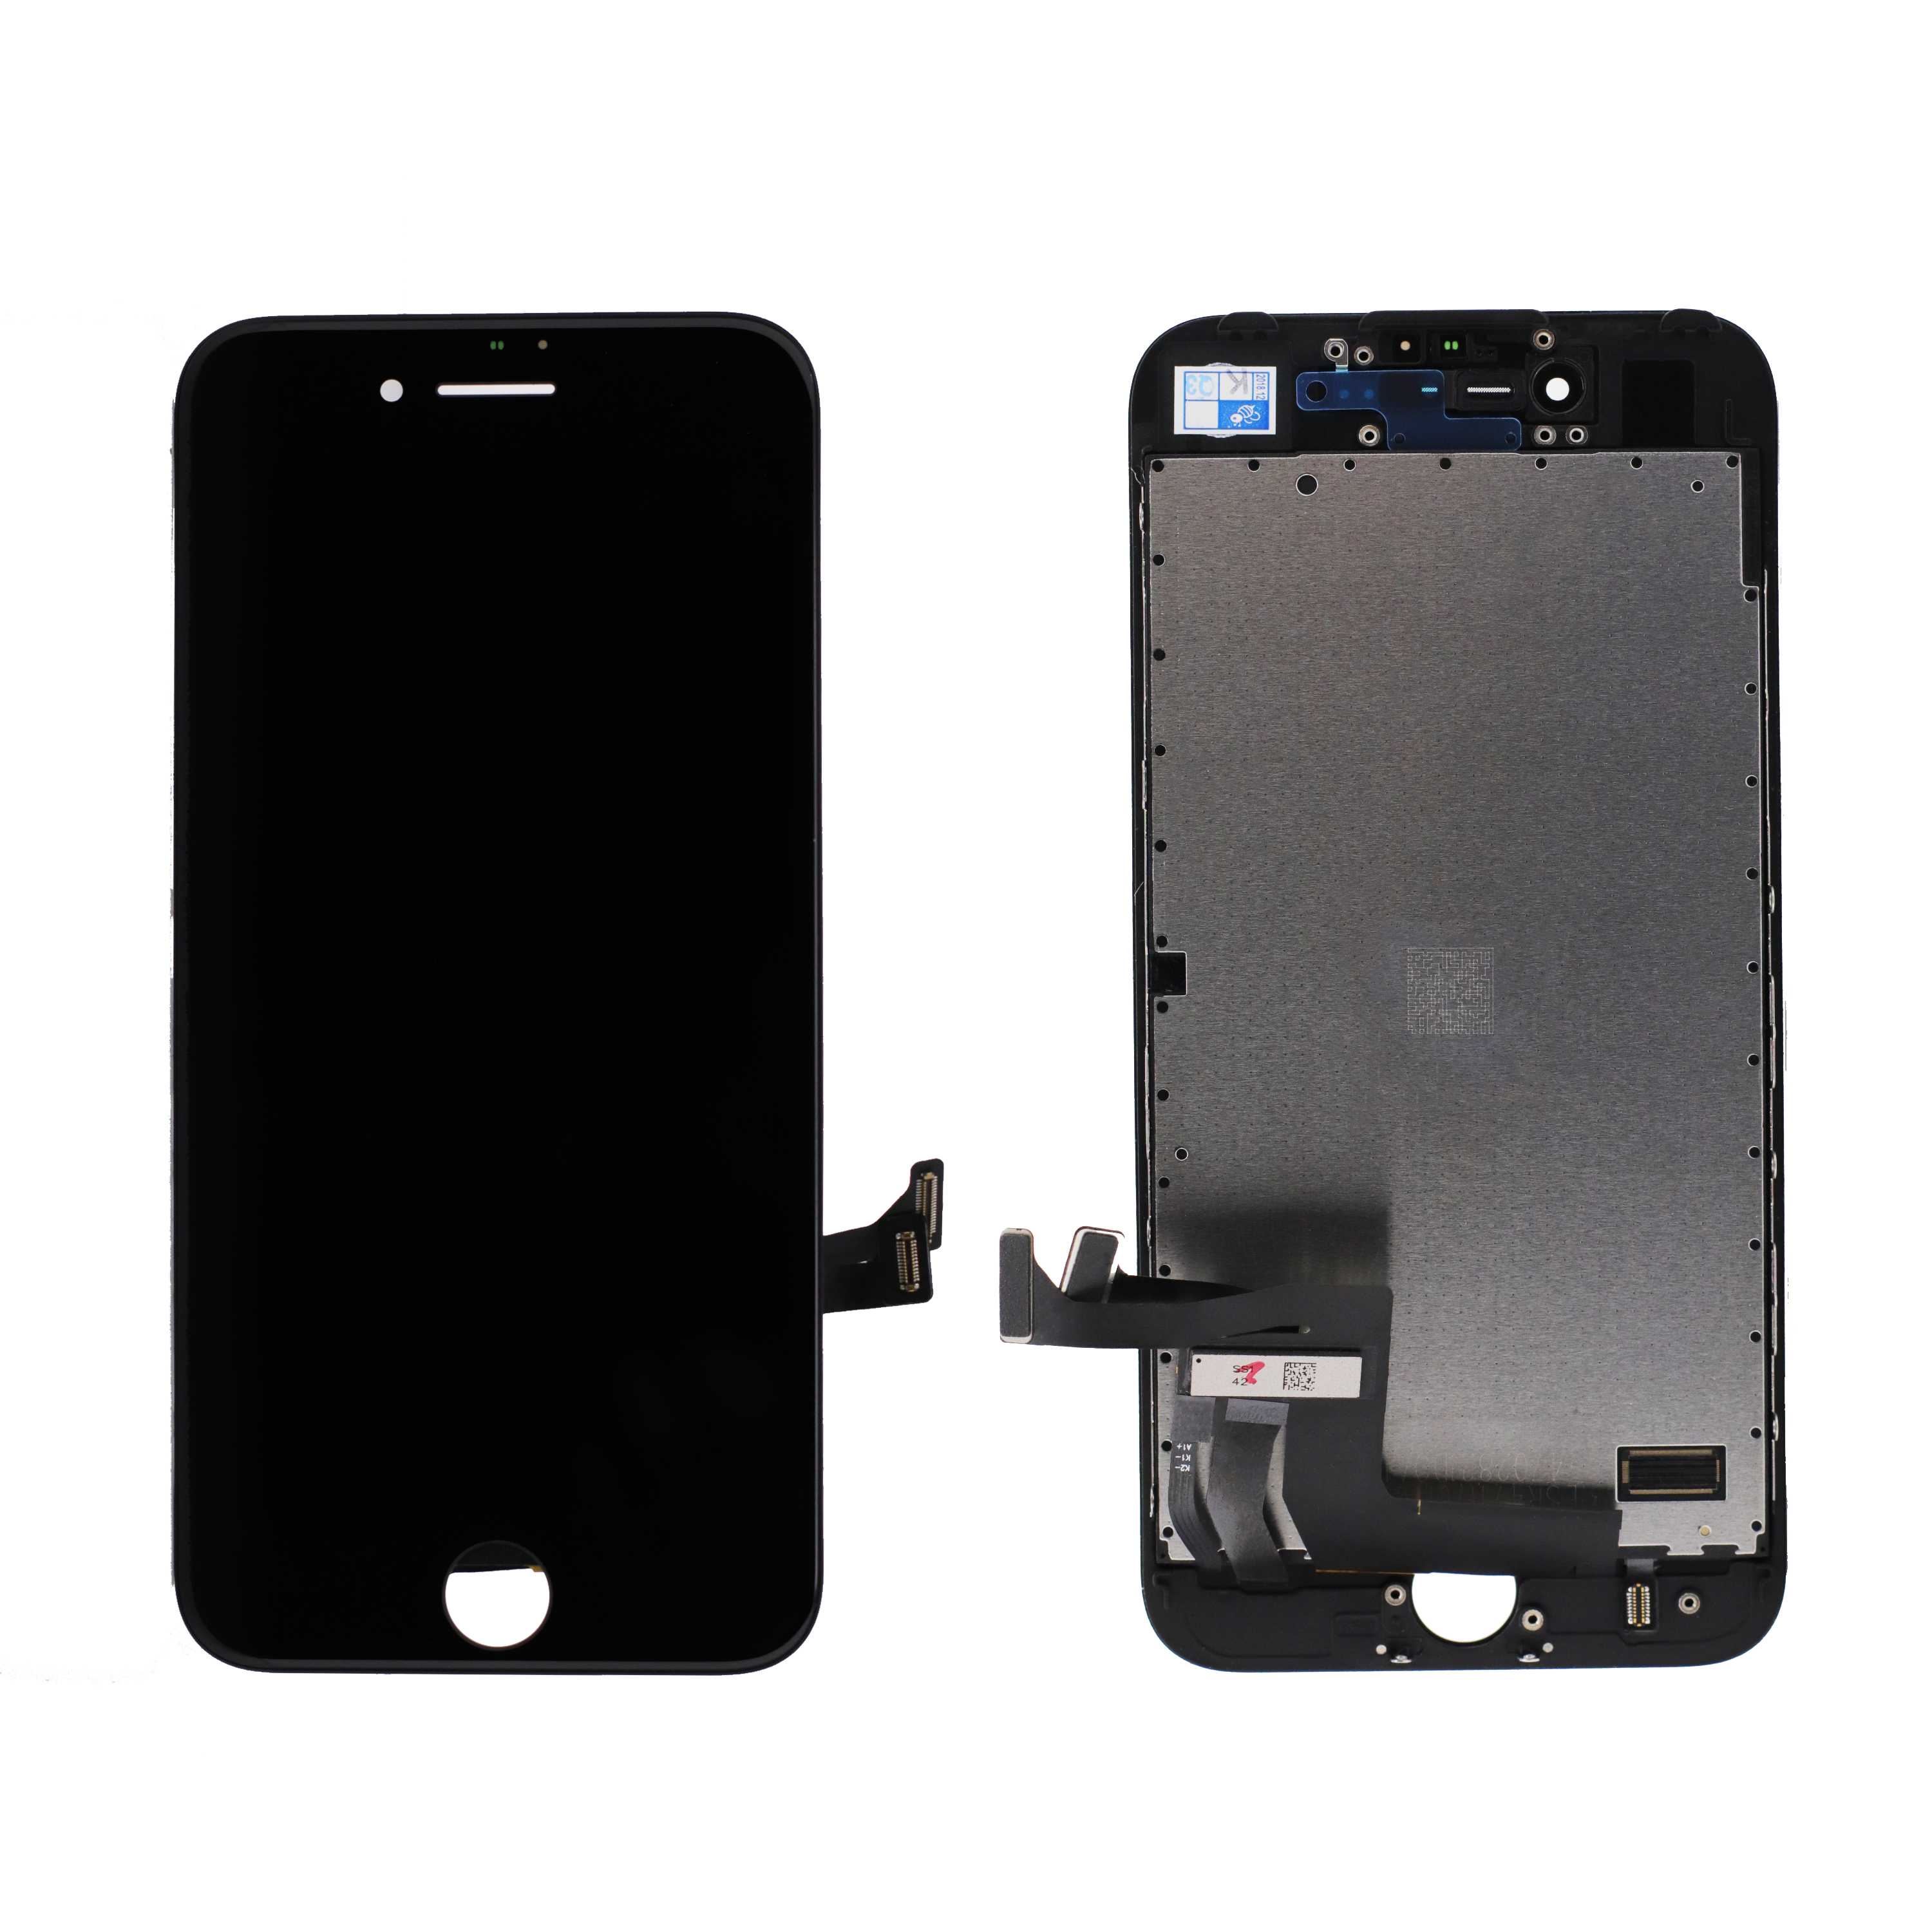 Premium LCD Assembly for use with iPhone 7 (Black)